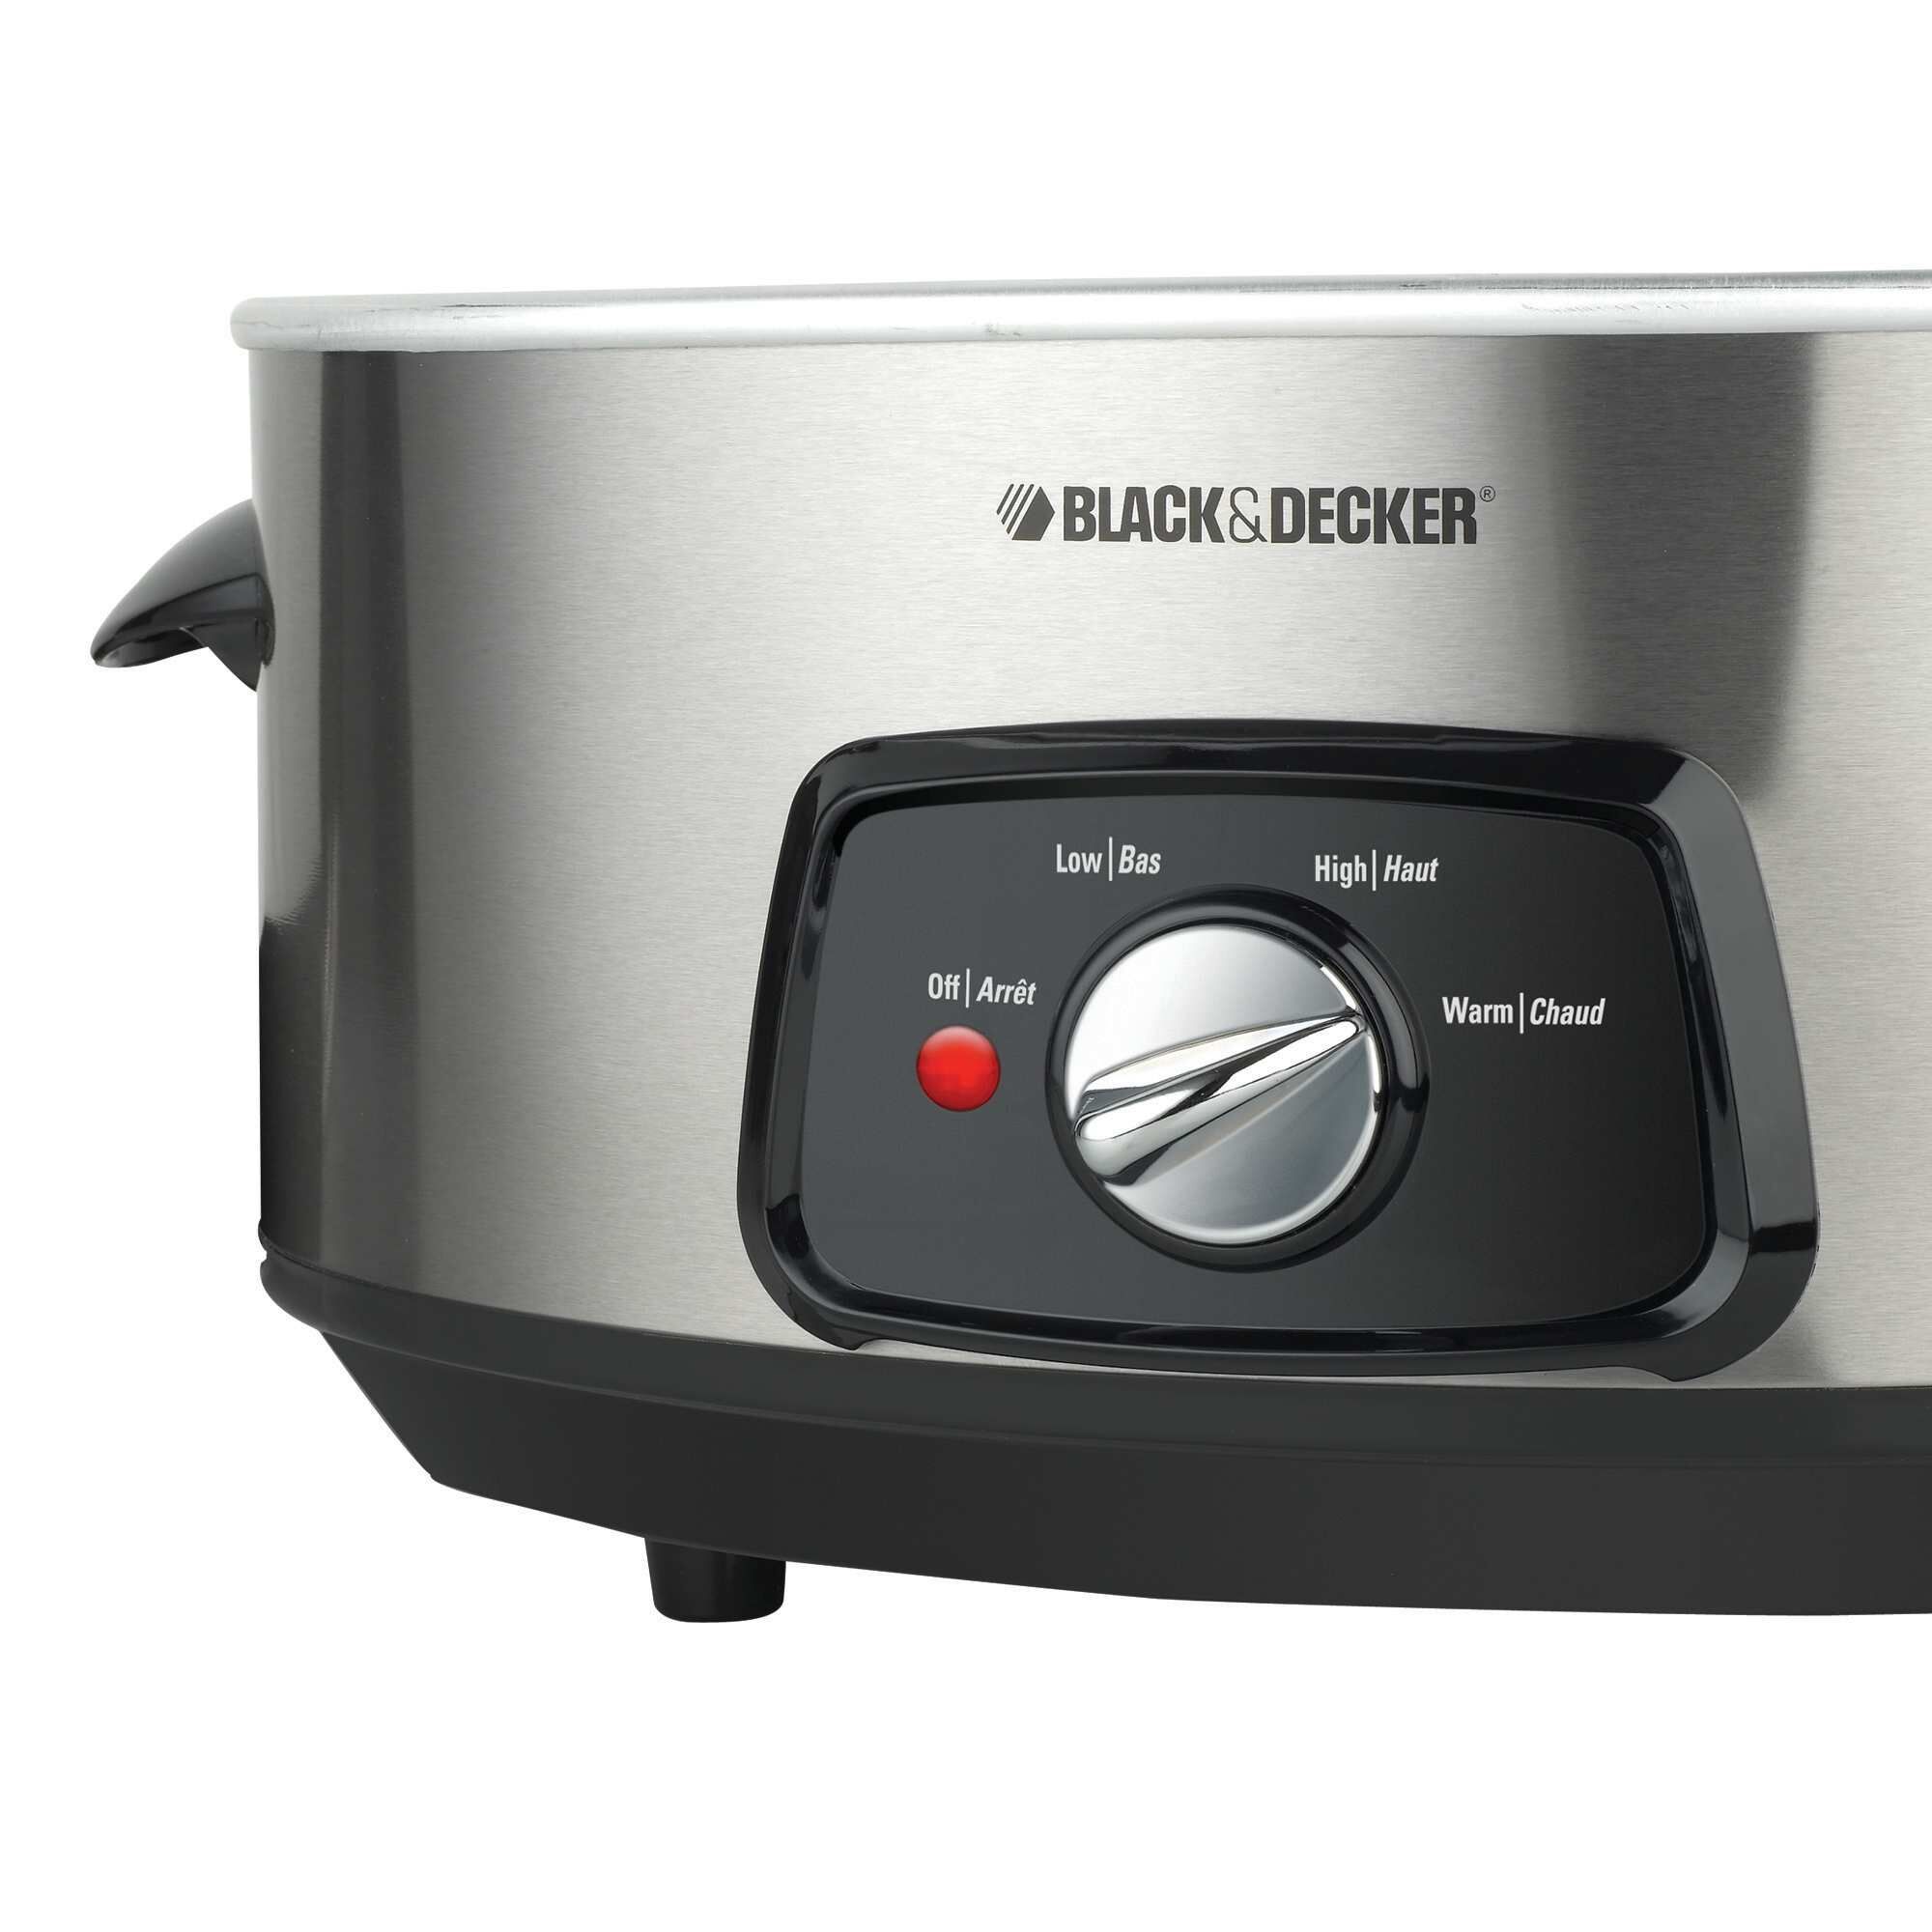 Close up of the control knob for the BLACK+DECKER slow cooker